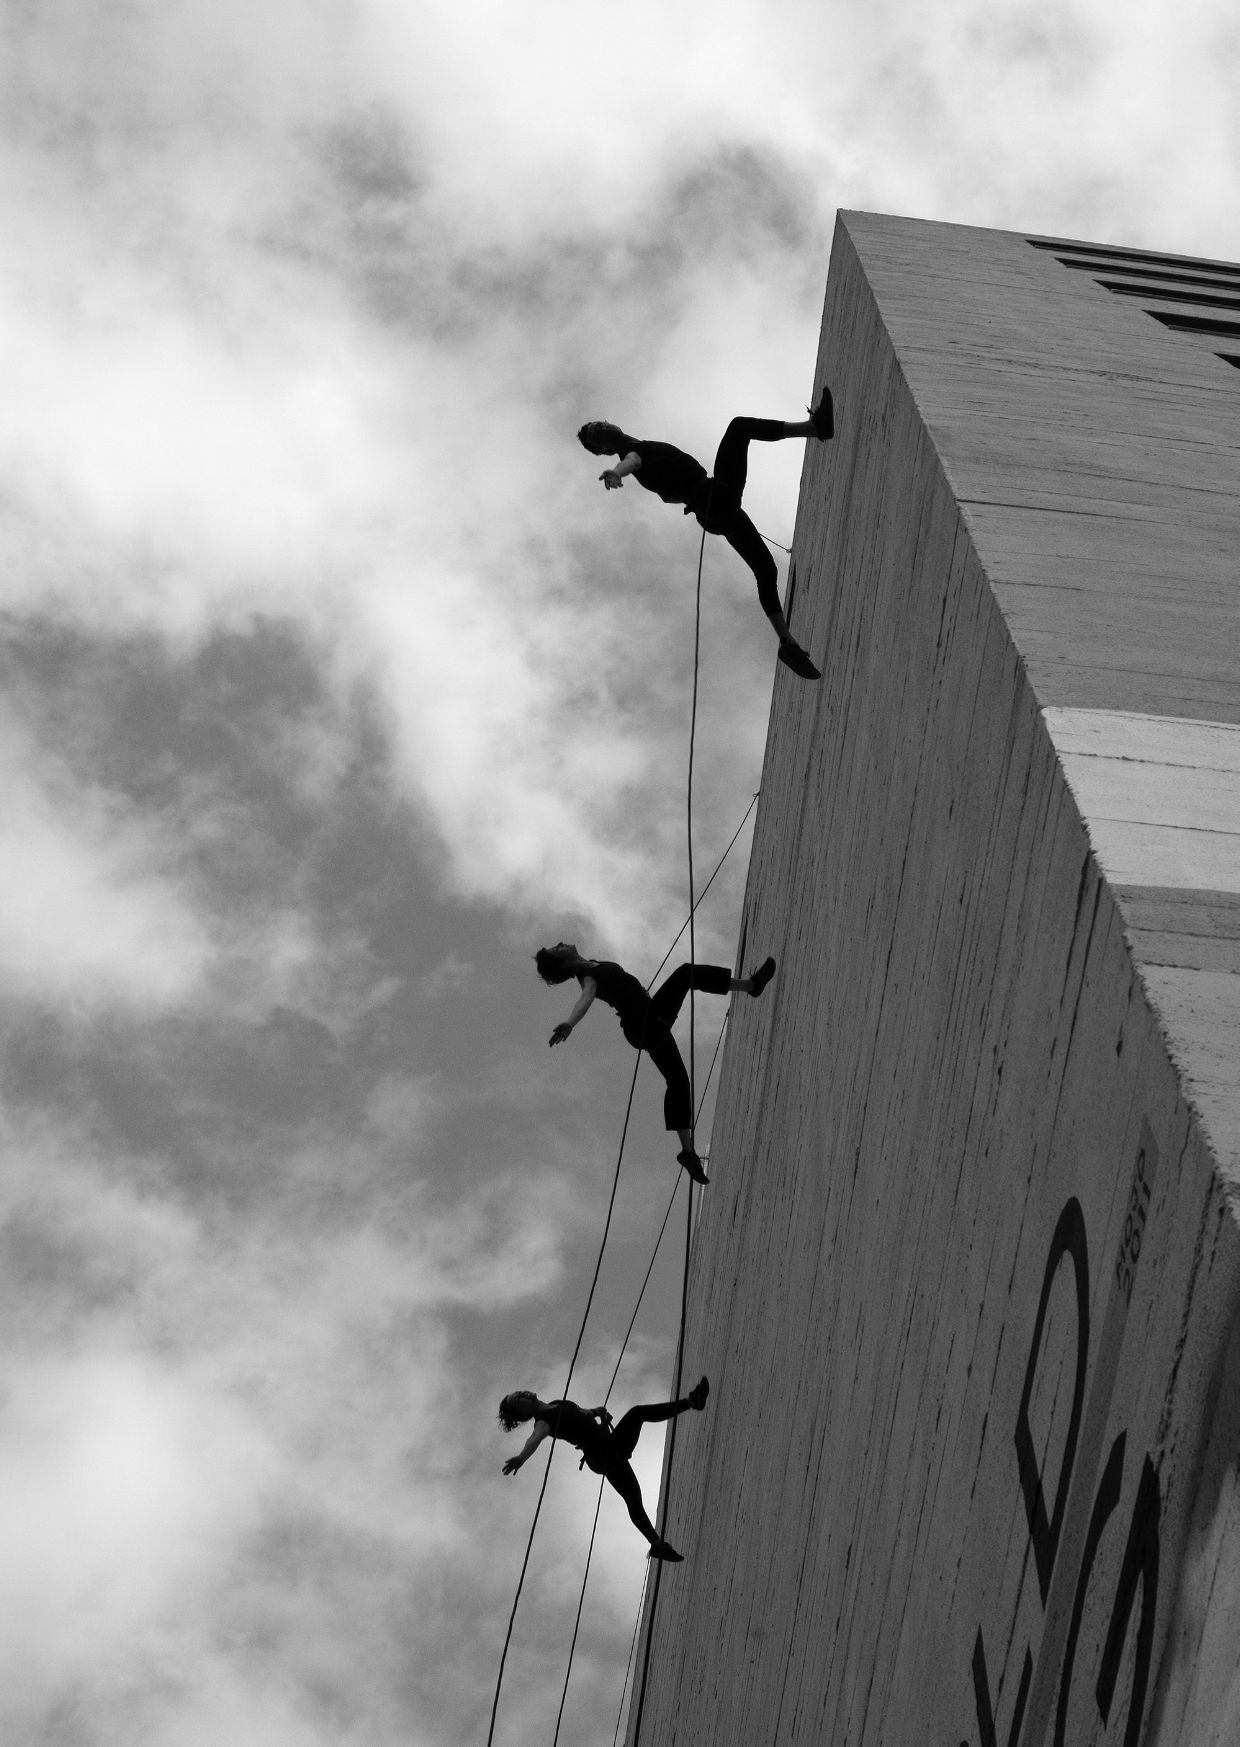 Three people can be seen climbing a wall on a single rope.